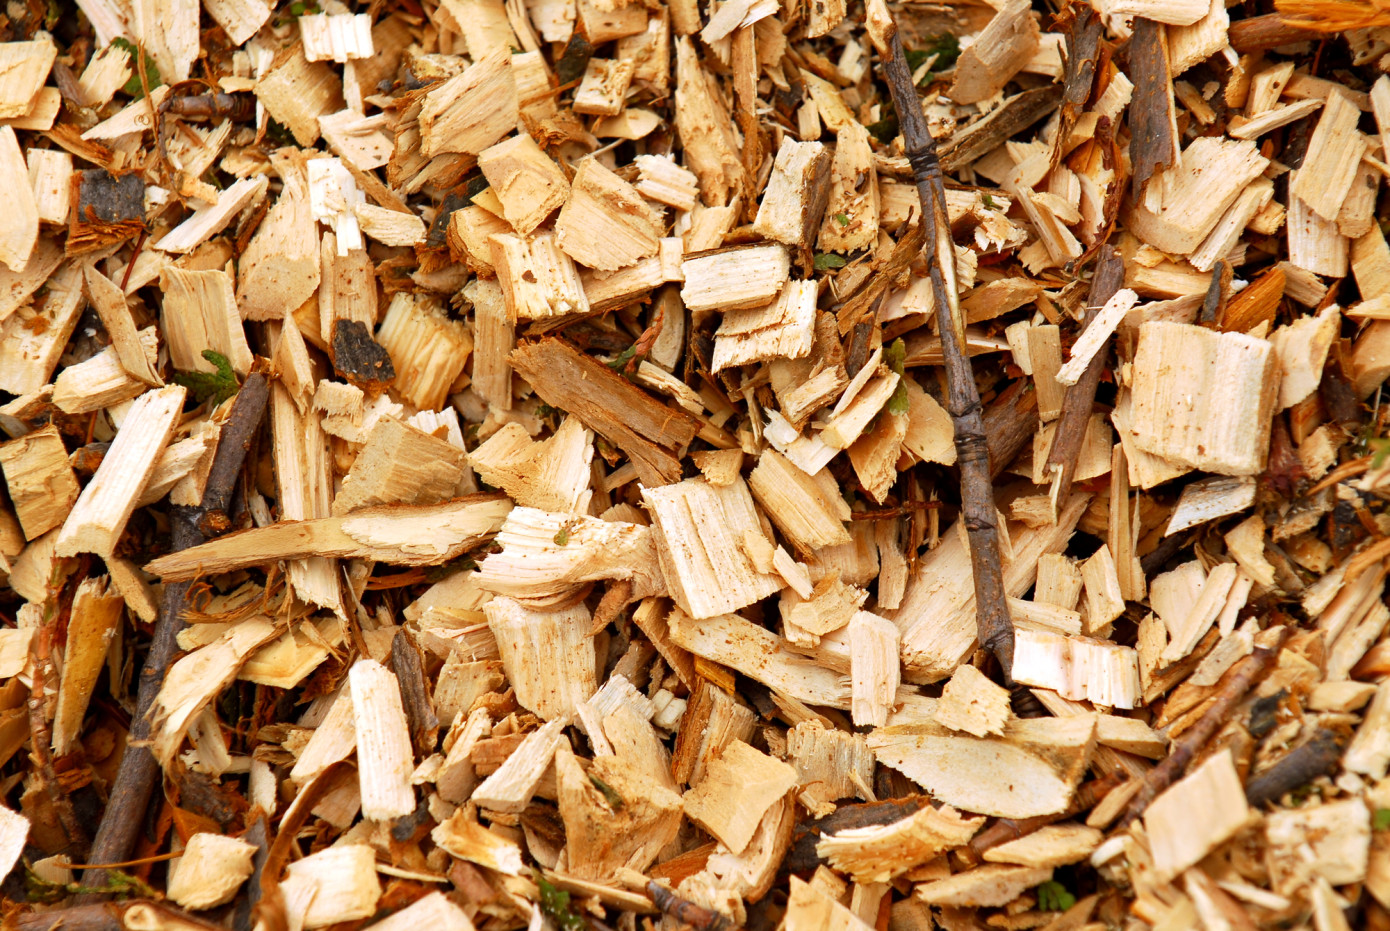 In July, price for imported wood chips in Japan increased 4.2%